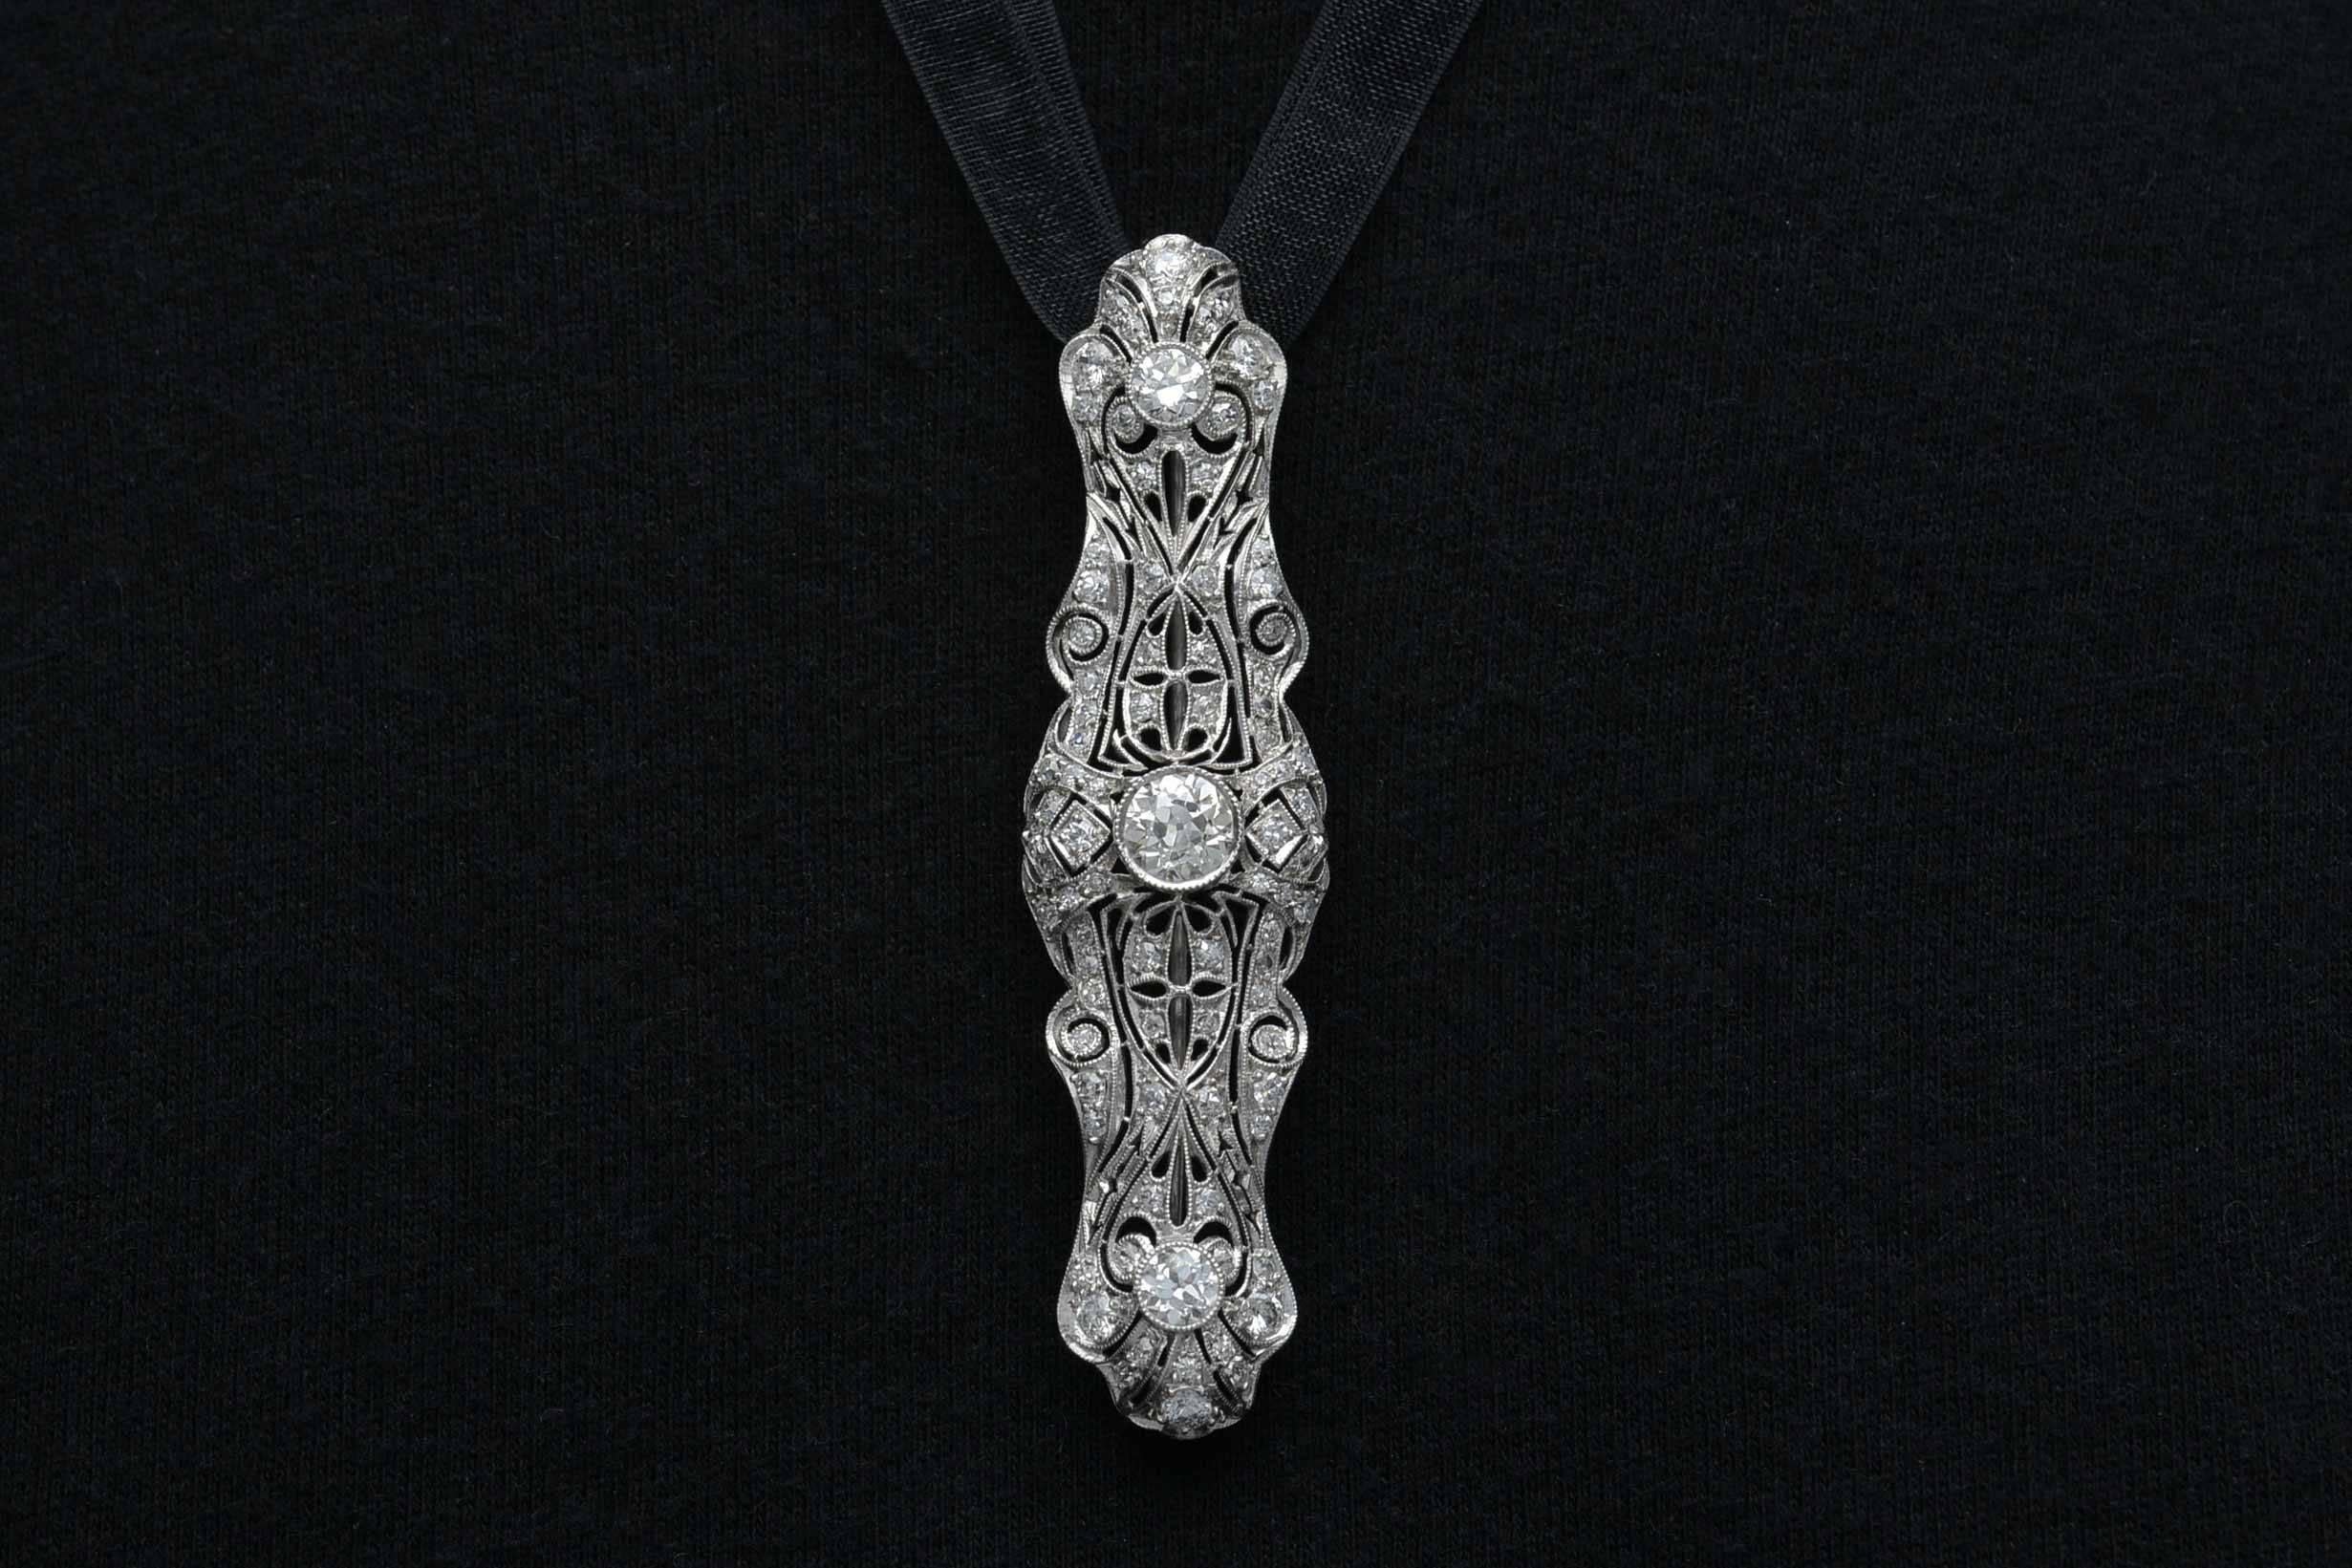 With the most mesmerizing pierced openwork filigree, this antique Edwardian Art Deco platinum brooch or pin is a most versatile accessory for your wardrobe. Admiring glances will notice the near 1 carat (0.96 ct.) fiery and brilliant old European